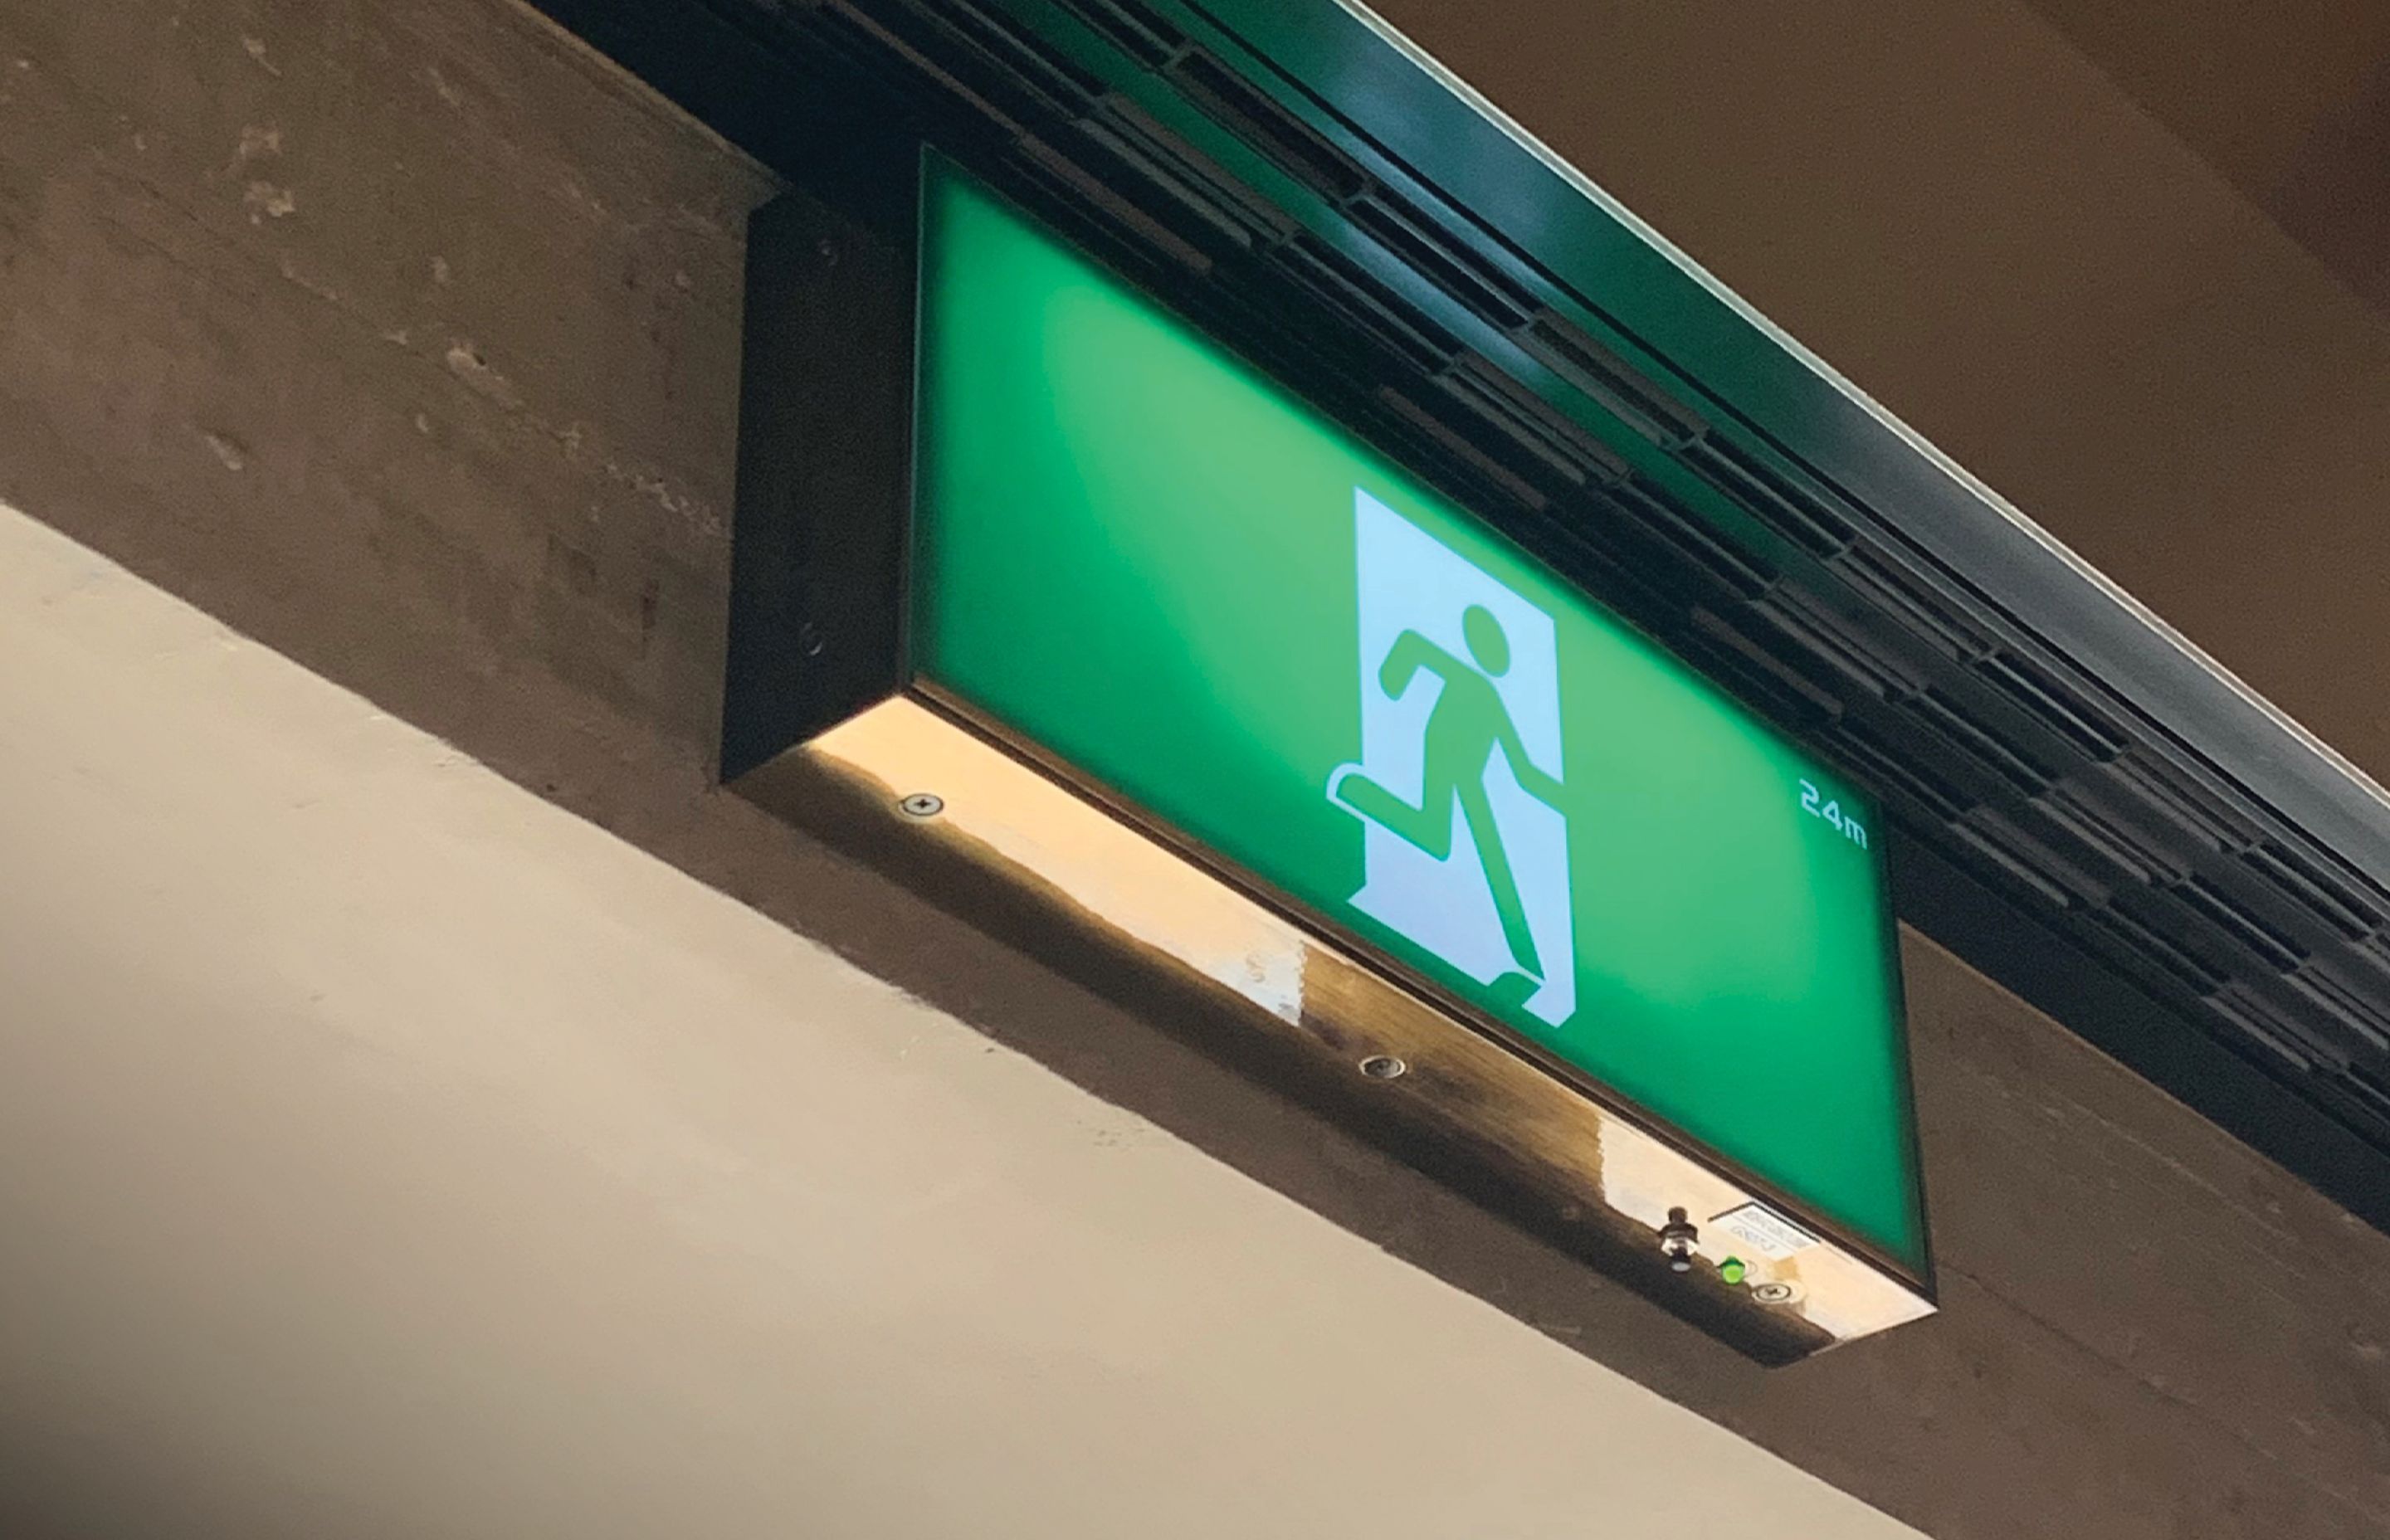 Clevertronics can customise emergency lighting solutions to complement the design of a project.